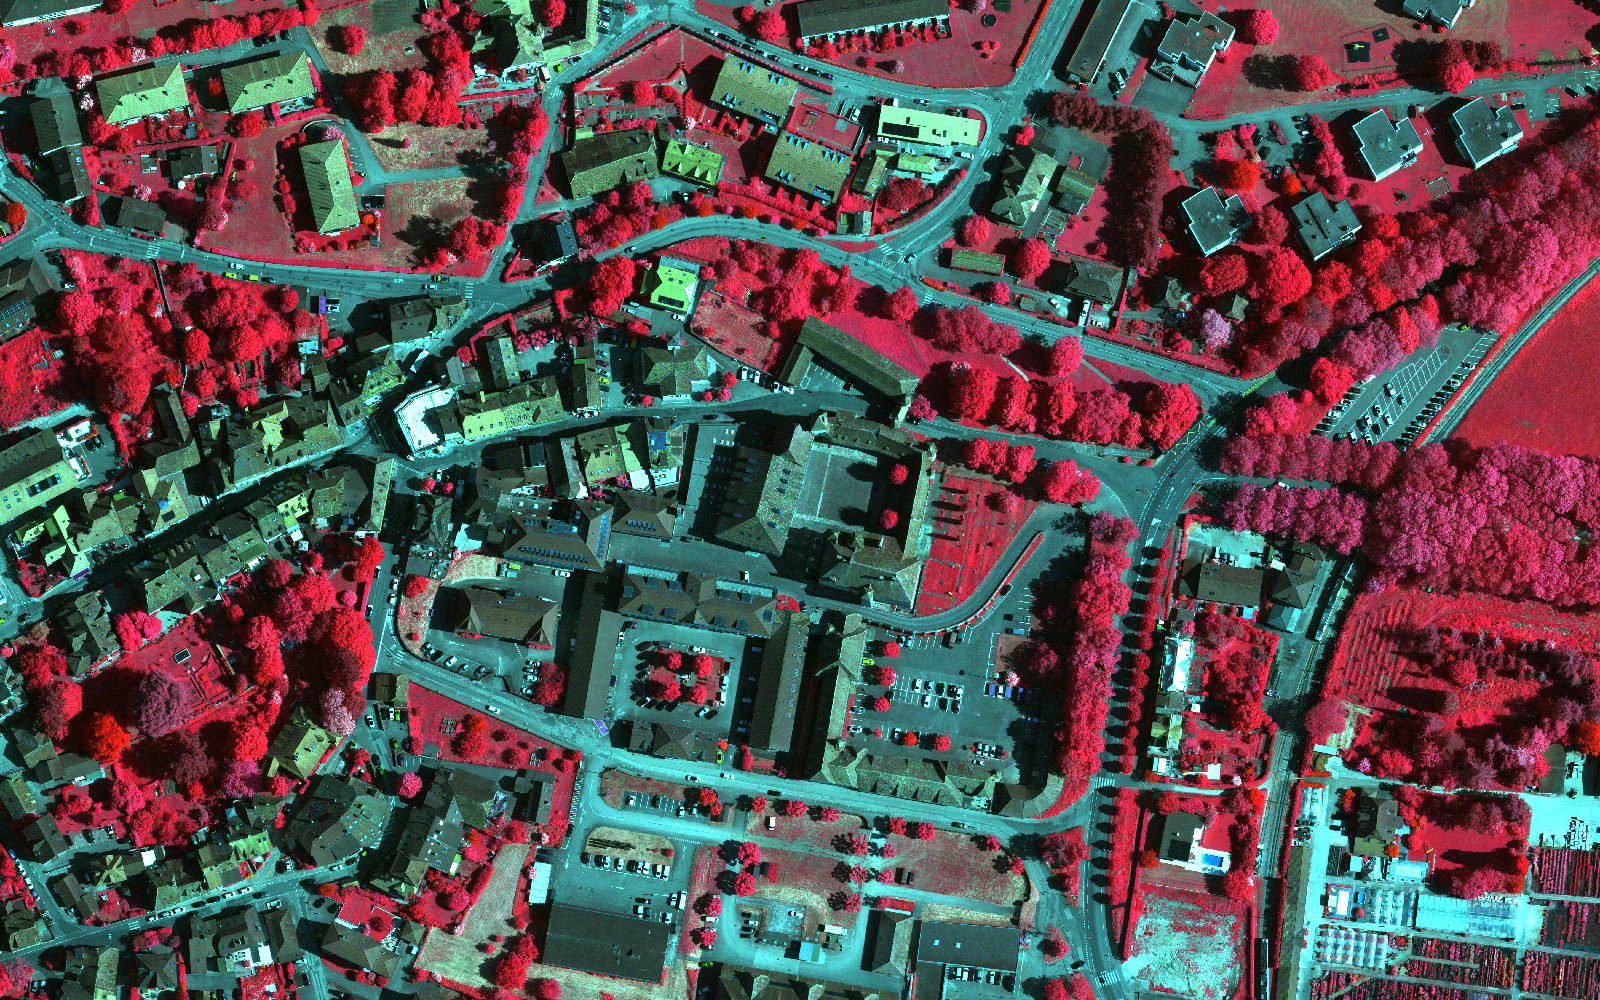 The picture shows an infrared aerial view of the old town centre of Colombier (NE).